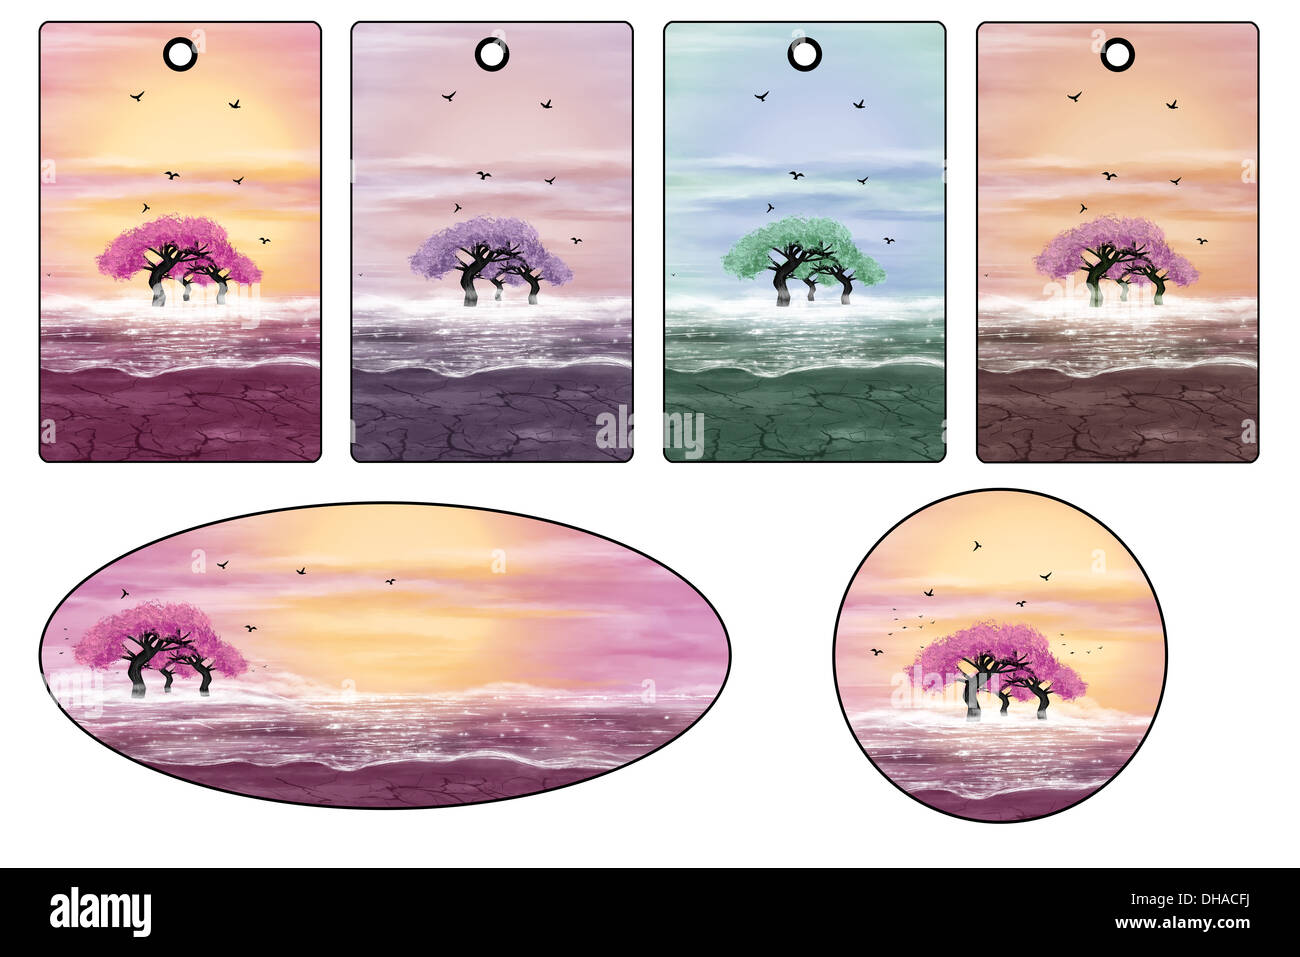 Stickers and labels with pink trees. Fantasy landscape. Digital art. Stock Photo